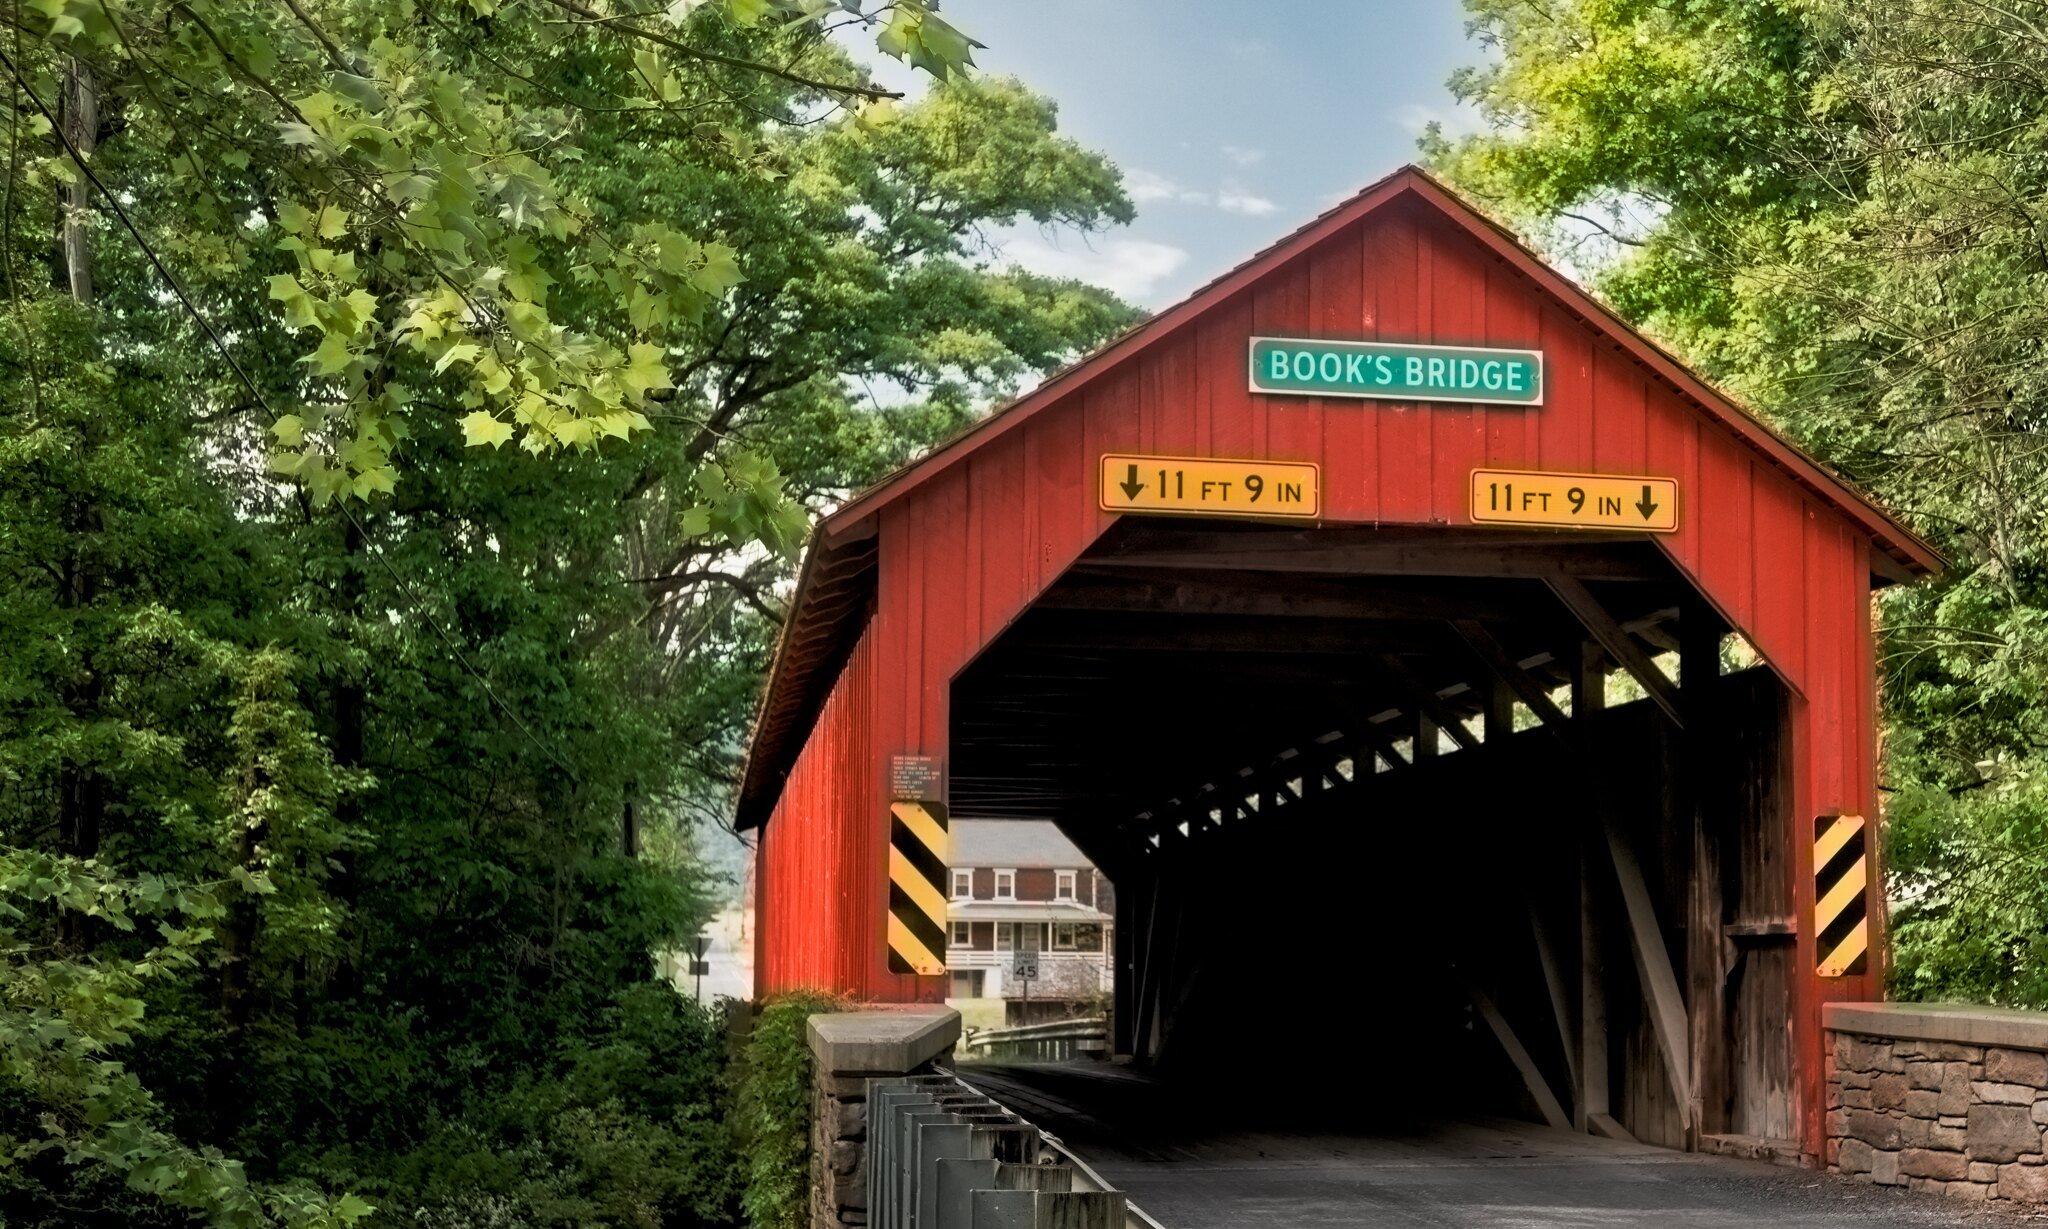  Books Covered Bridge in Jackson Township, Perry County, PA.  Built in 1854 and rebuilt in 2003-2004. 